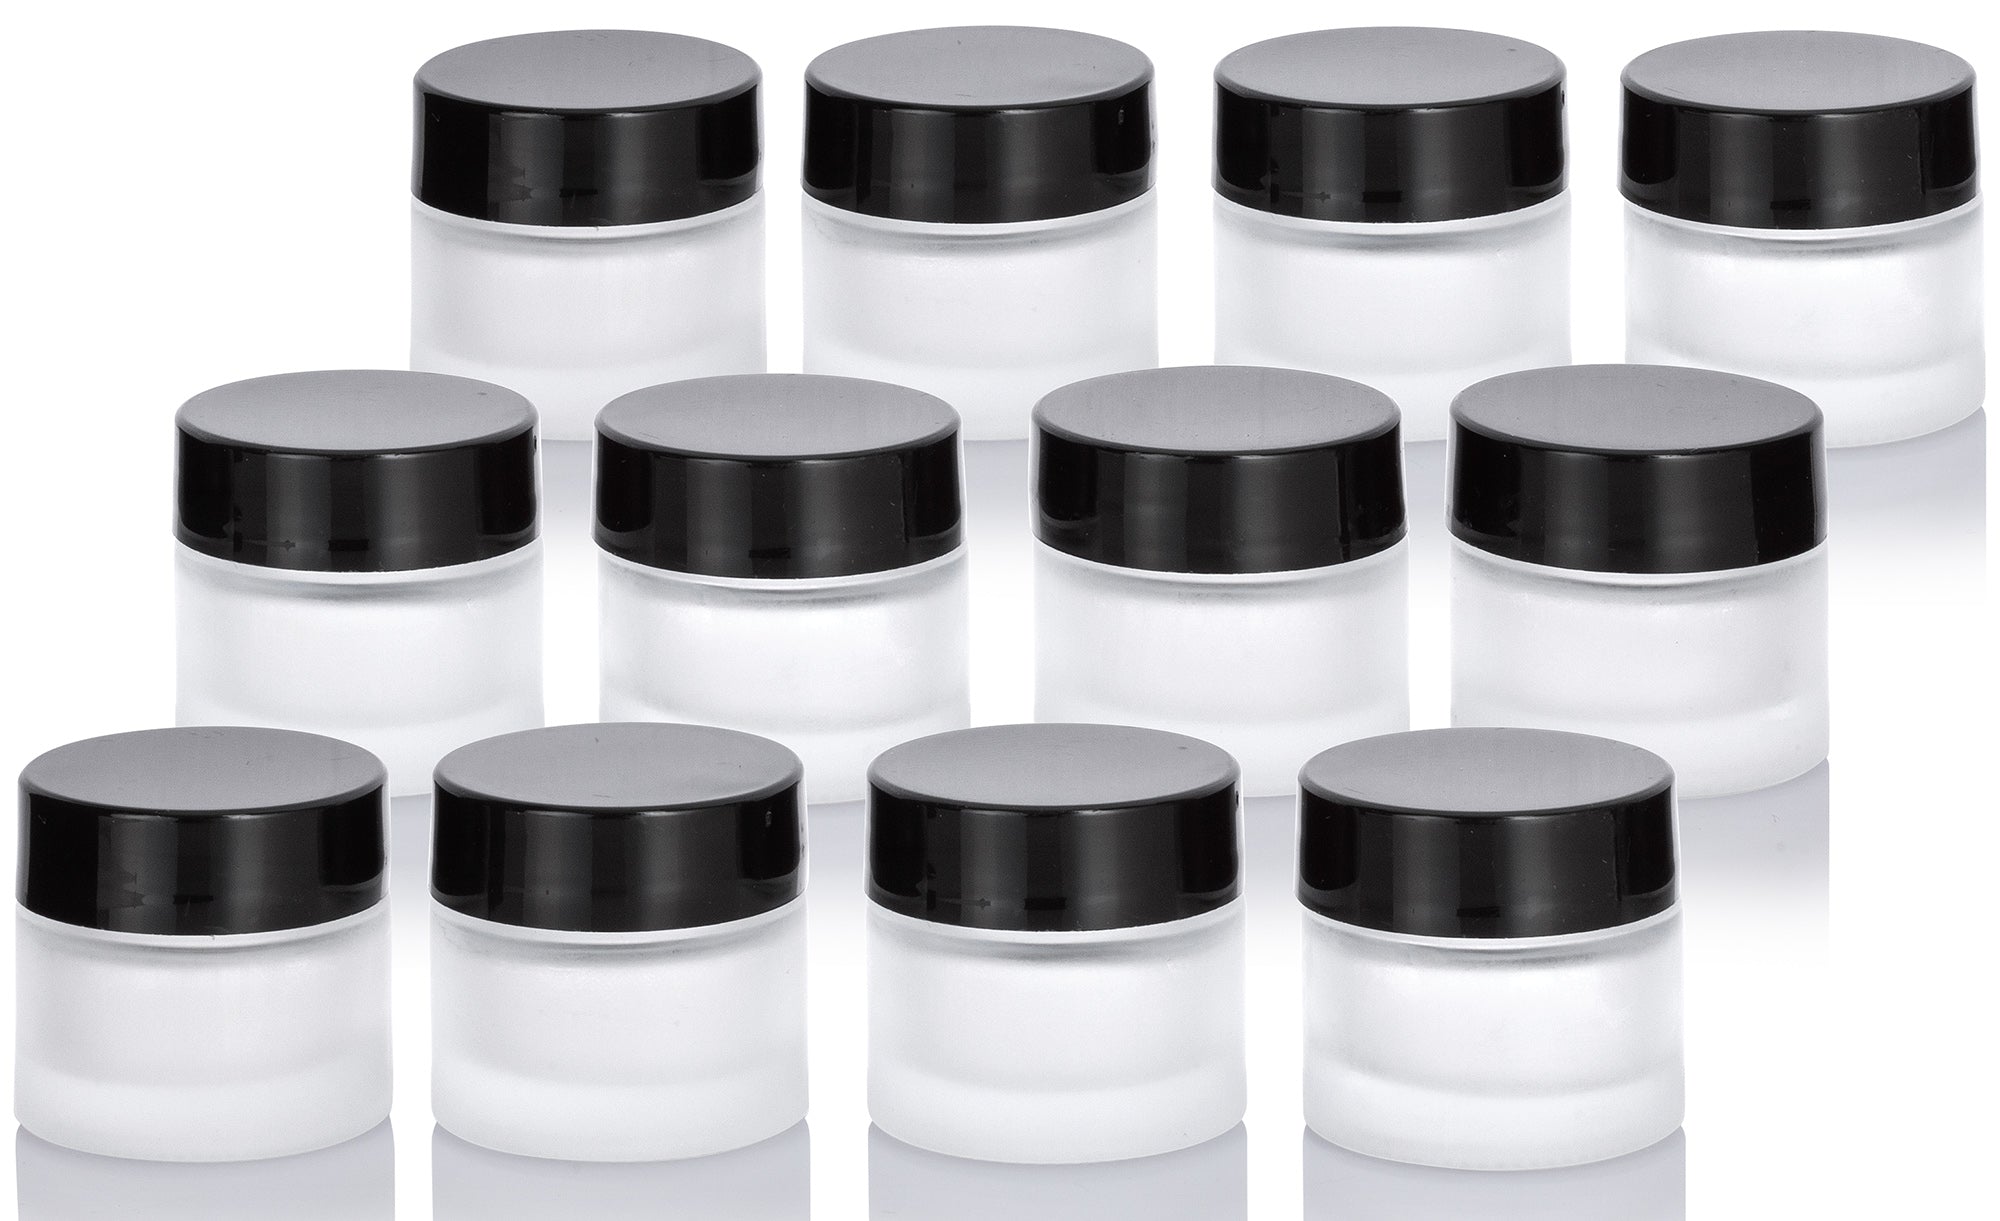 JUVITUS Frosted Clear Glass 8 ml / .27 fl oz Small Thick Wall Balm Salve Pot Container Jars with Black Smooth Foam Lined Lid, Women's